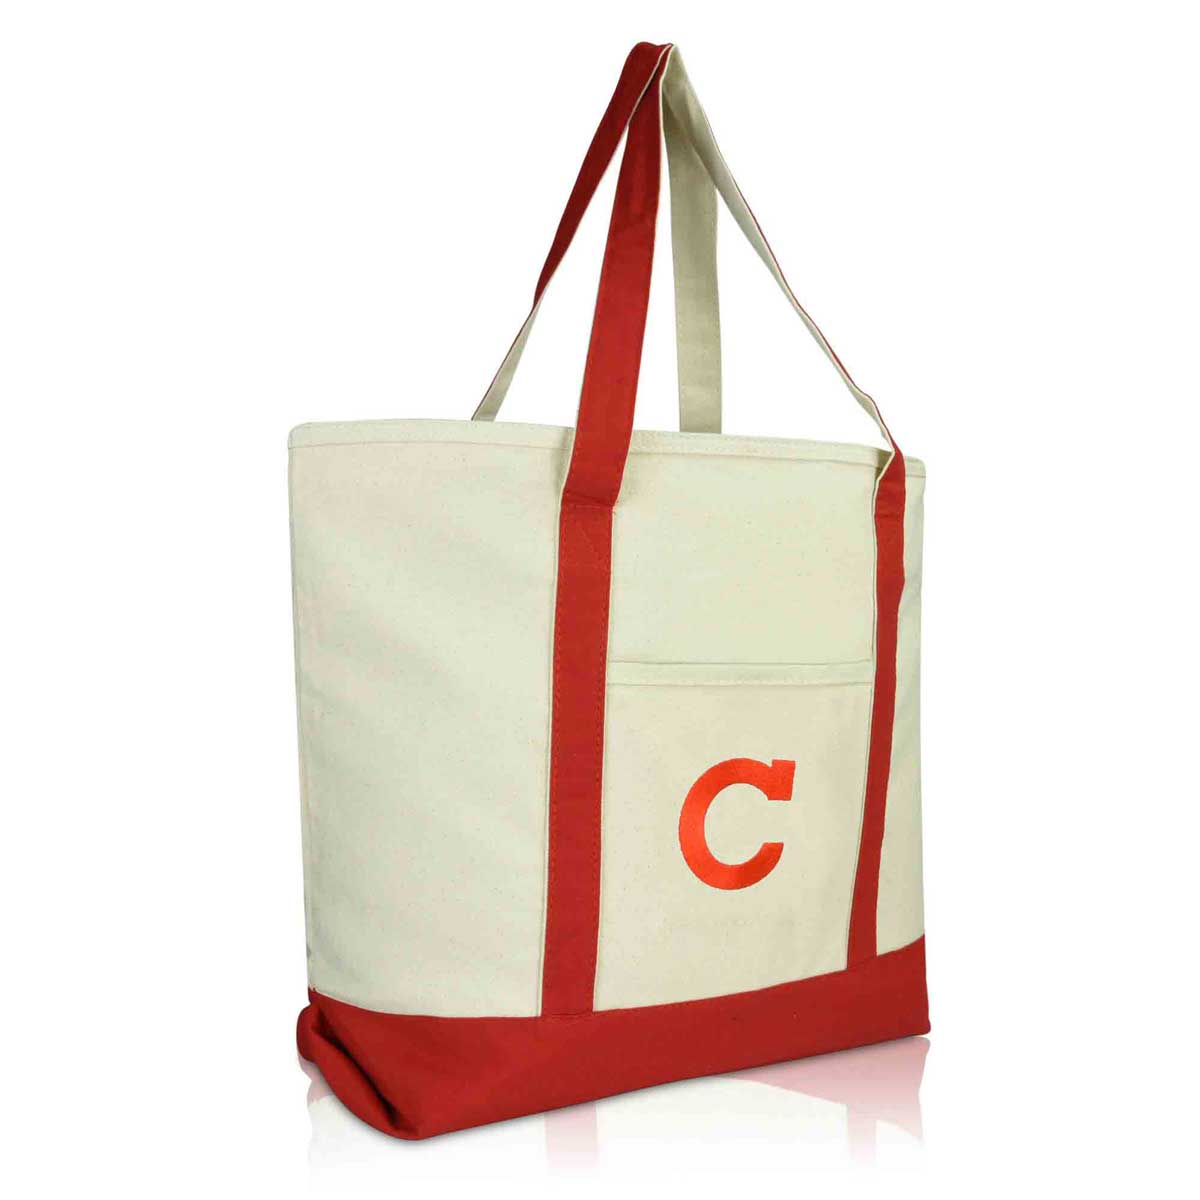 Monogrammed Zippered Top Canvas Tote With Handles : Medium 